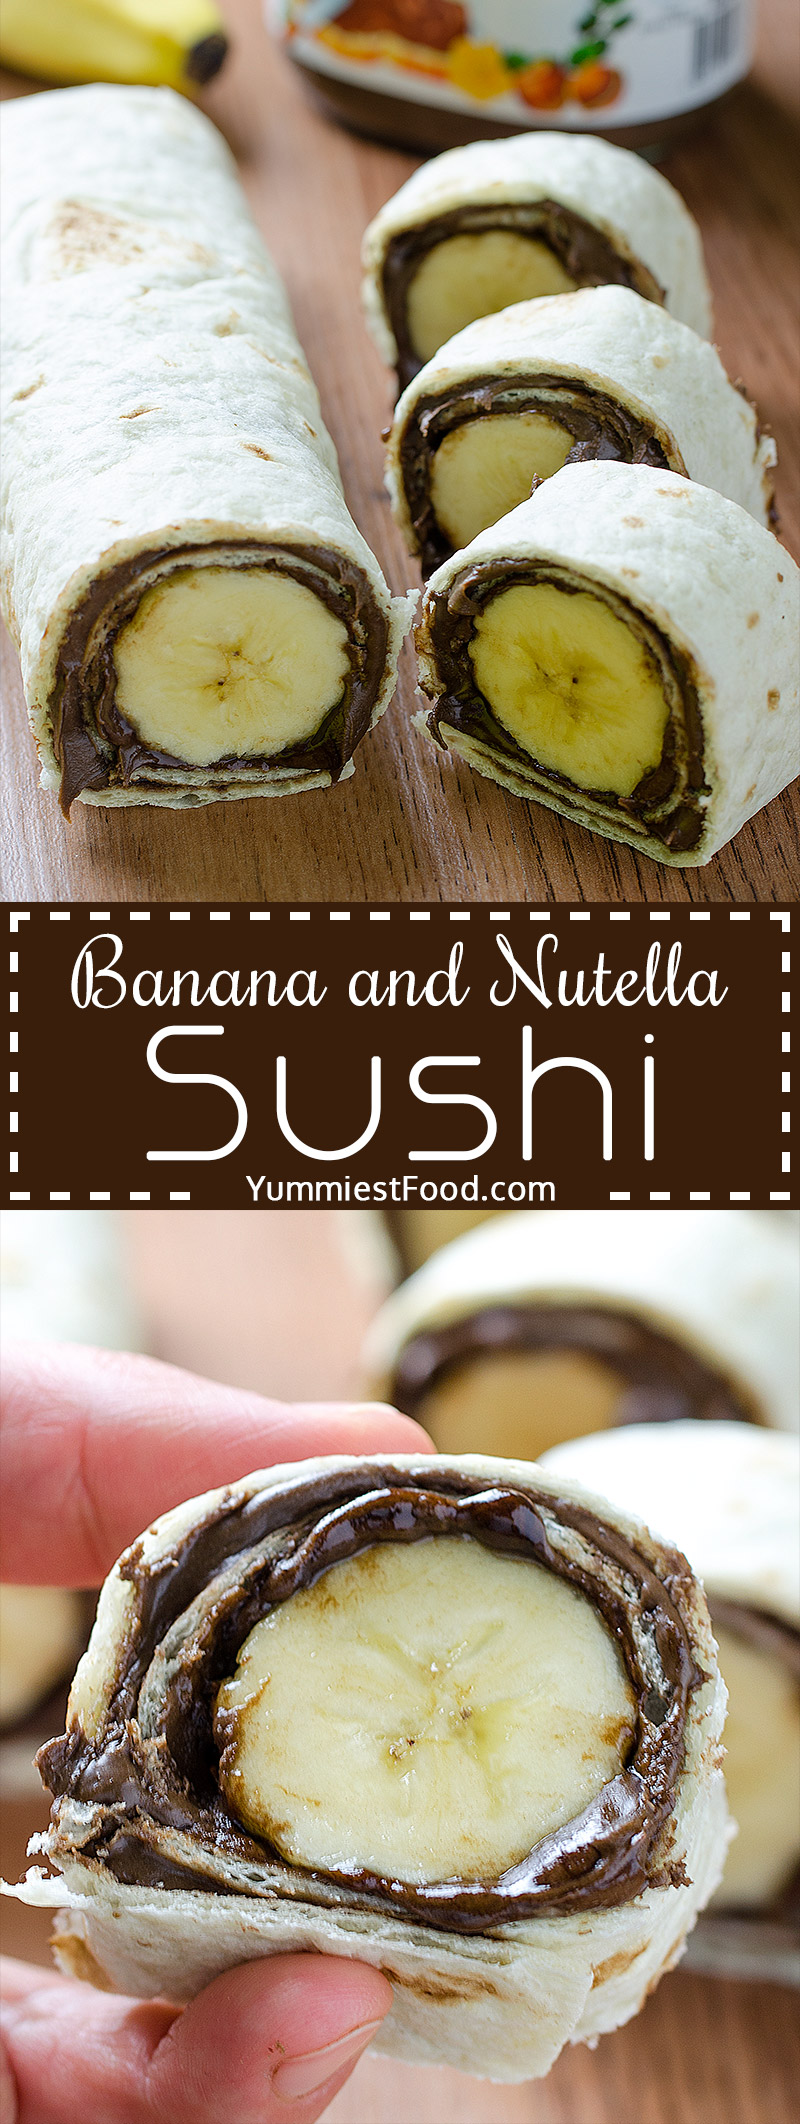 Banana and Nutella Sushi - Easy and healthy snack. Kids will love this Banana and Nutella Sushi.